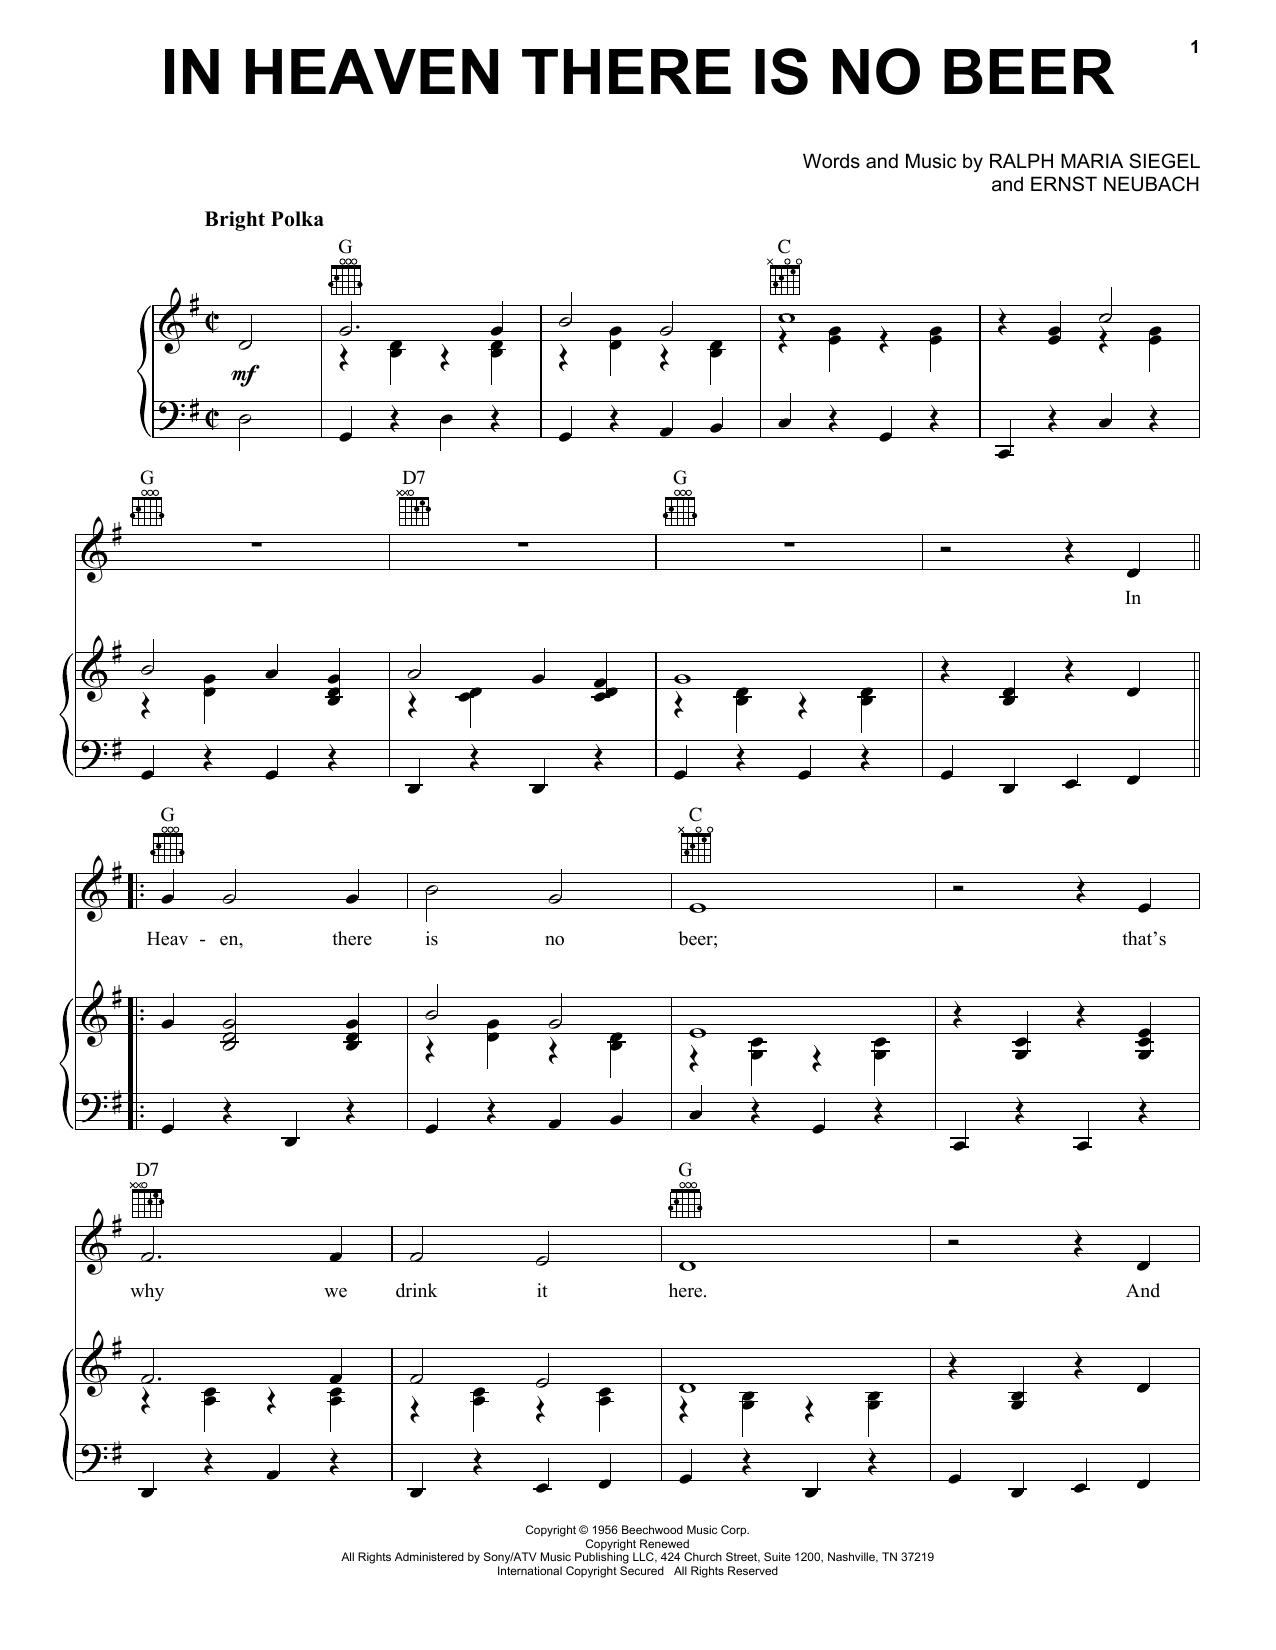 Download Ernst Neubach In Heaven There Is No Beer Sheet Music